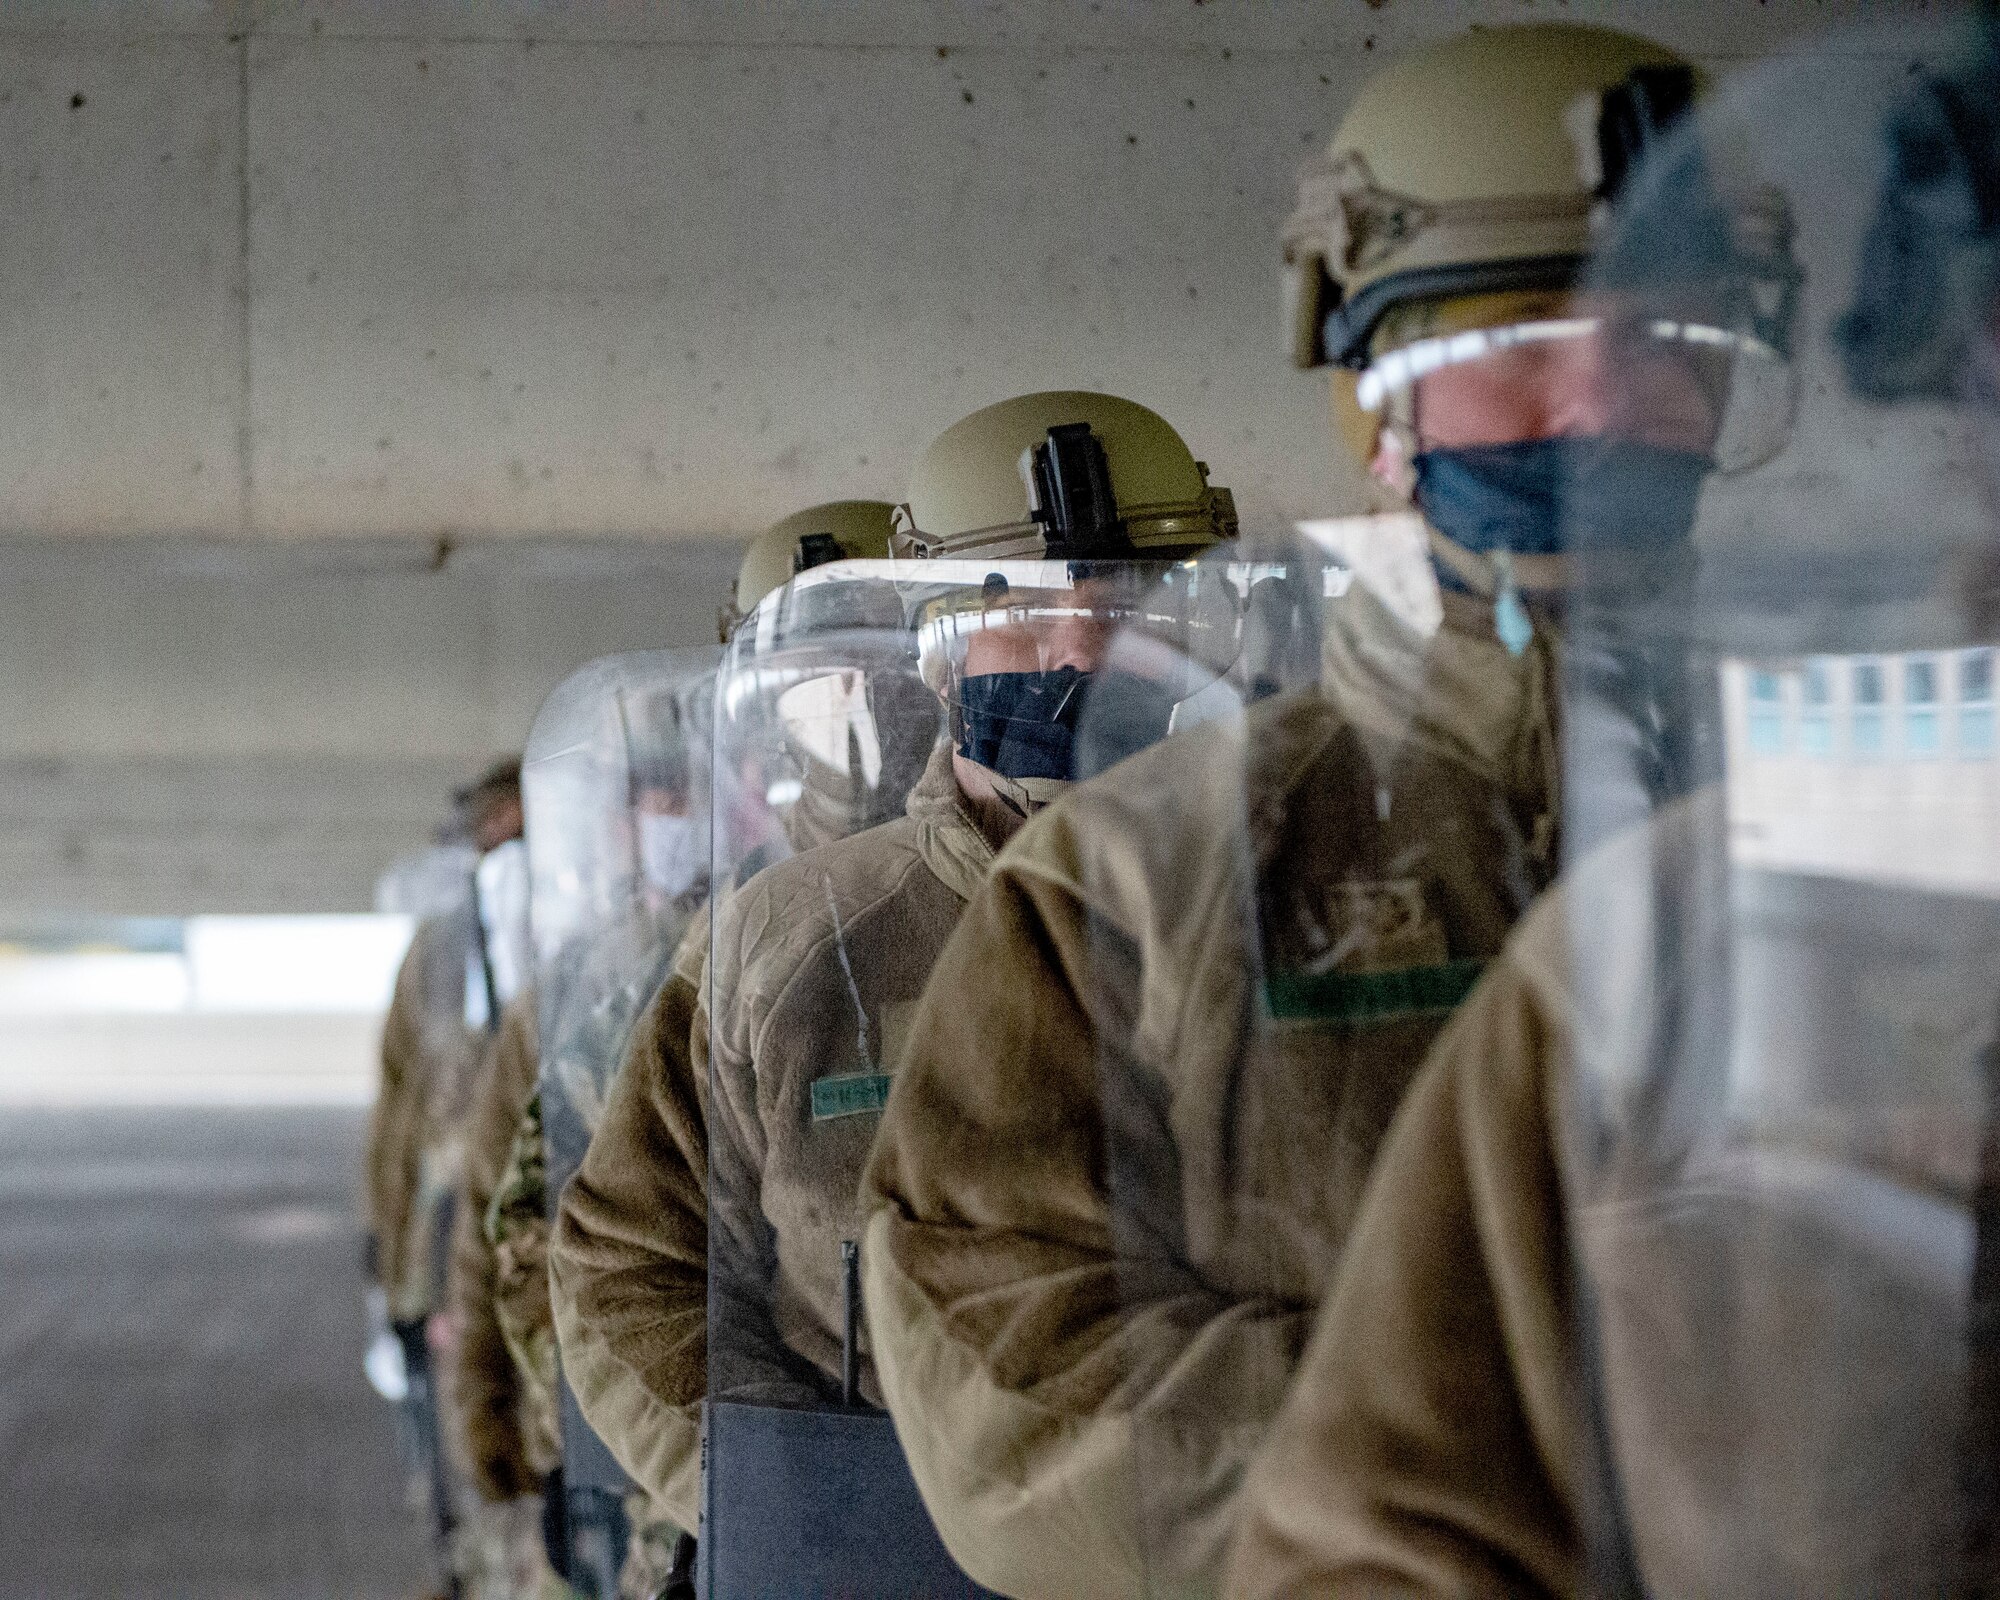 U.S. Air Force Airmen from the 133rd Airlift Wing and U.S. Army National Guard Soldiers participate in civil disturbance control training strengthening partnerships between local law enforcement and the Minnesota National Guard in St. Paul, Minn., April 20, 2021.